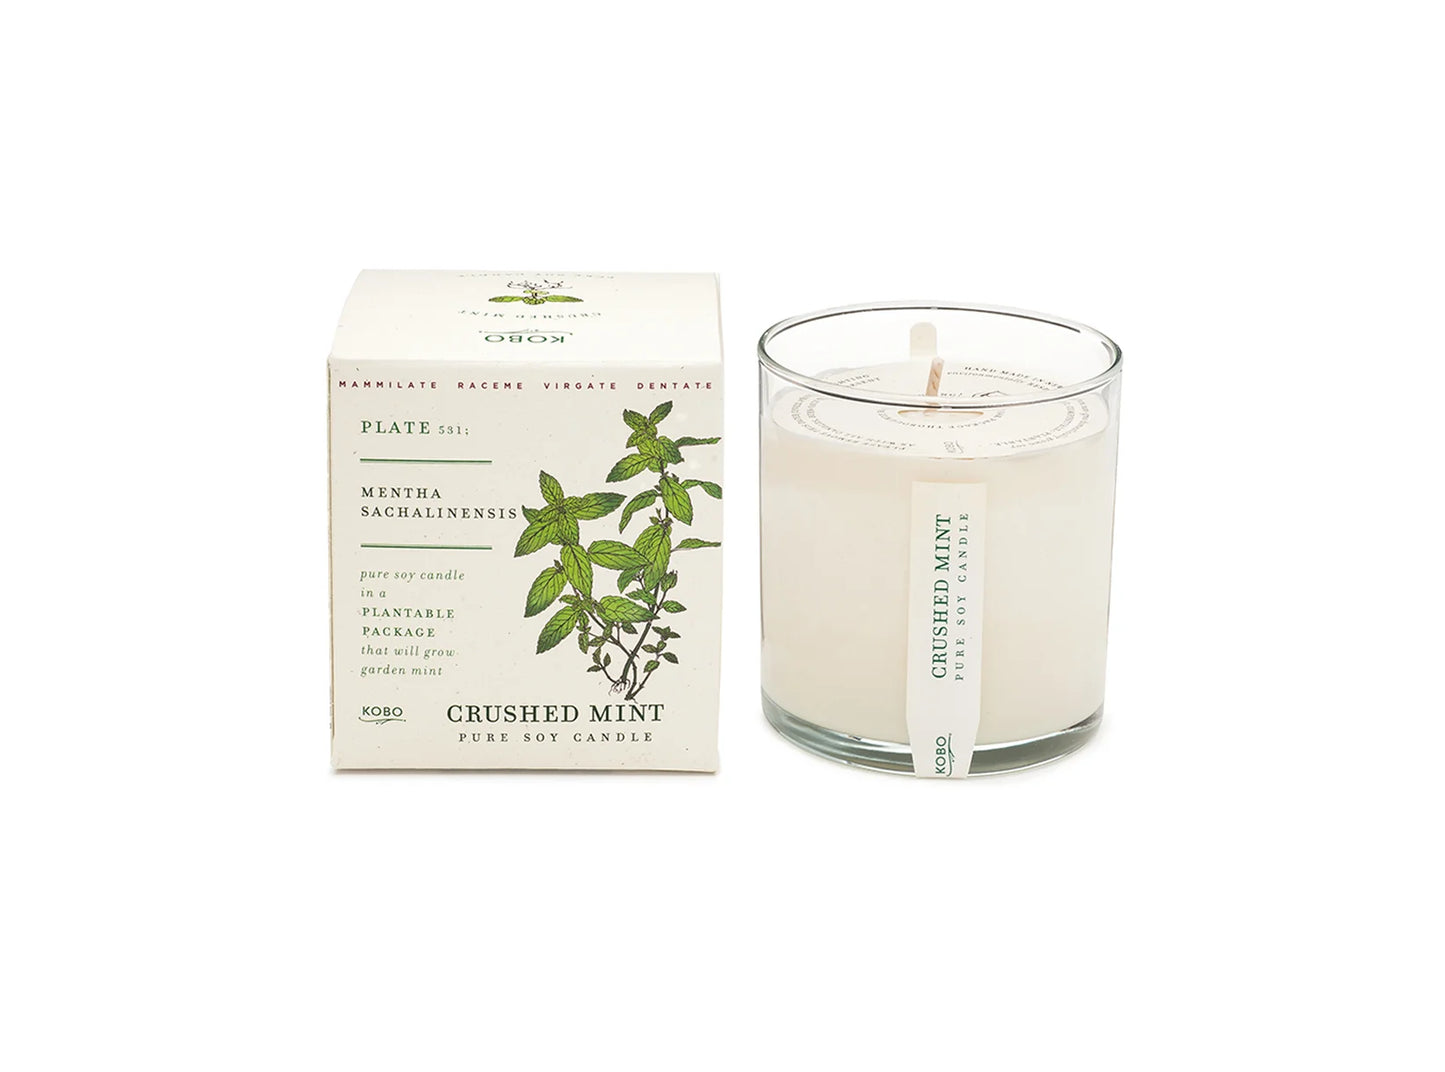 Crushed Mint Plant the Box Candle 9oz